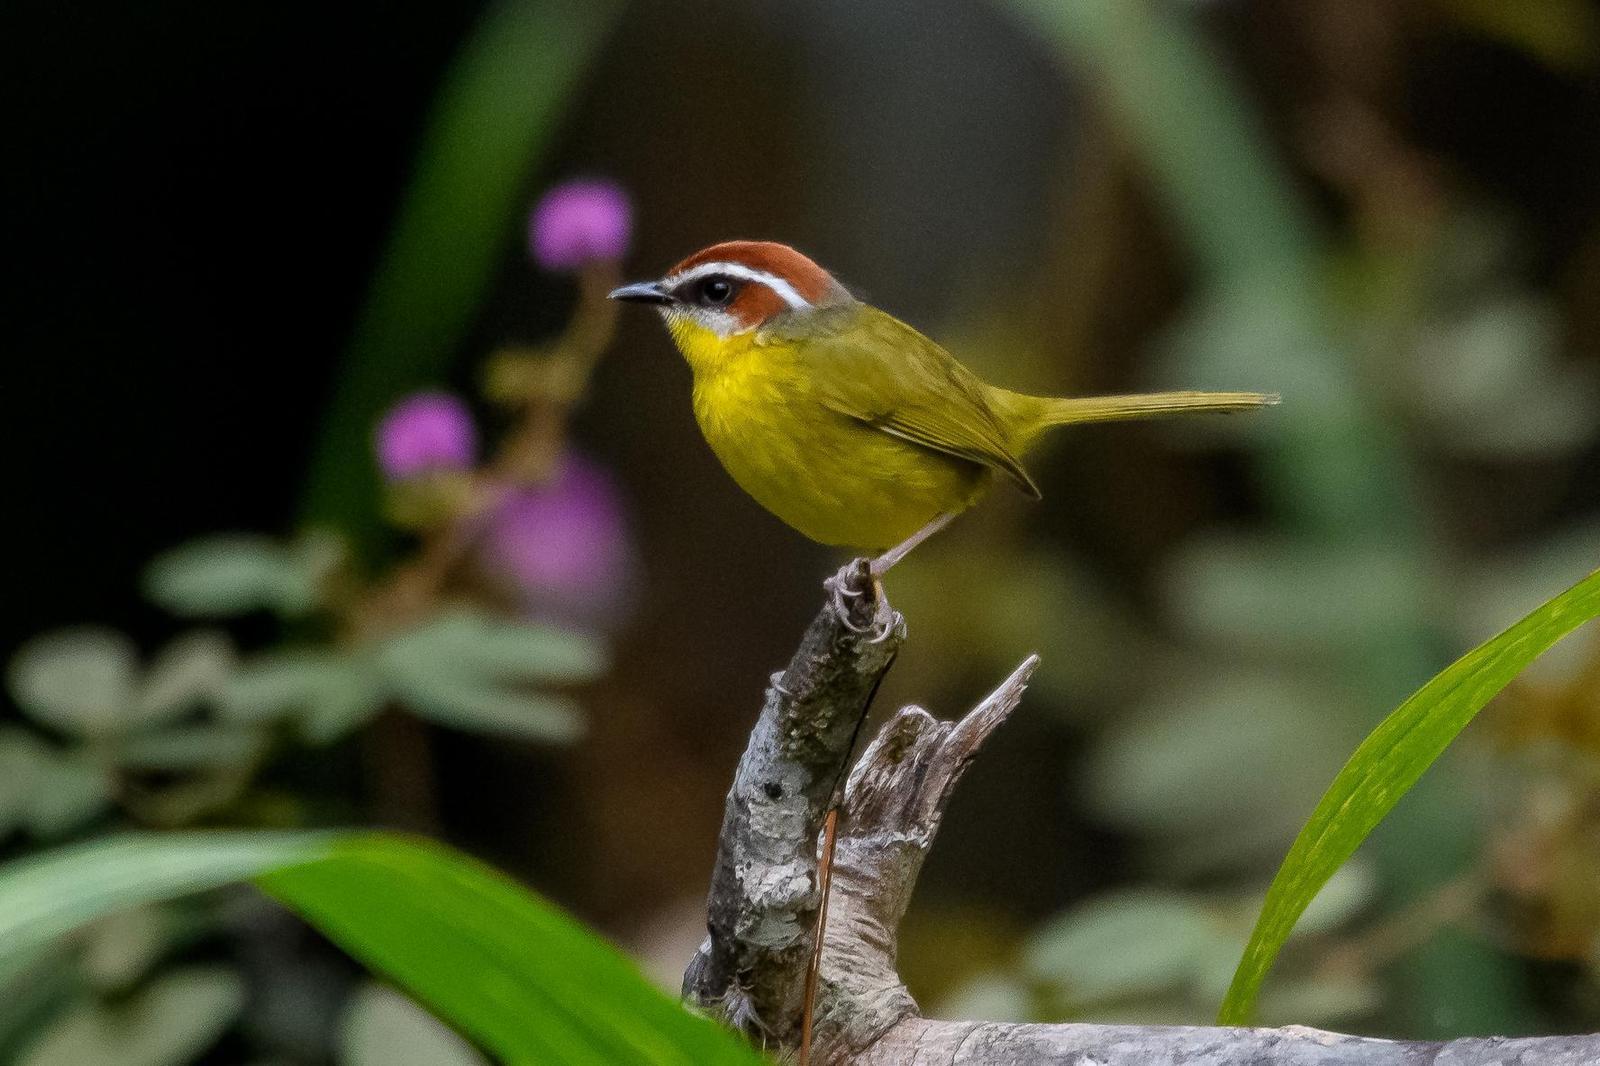 Rufous-capped Warbler Photo by Gerald Hoekstra